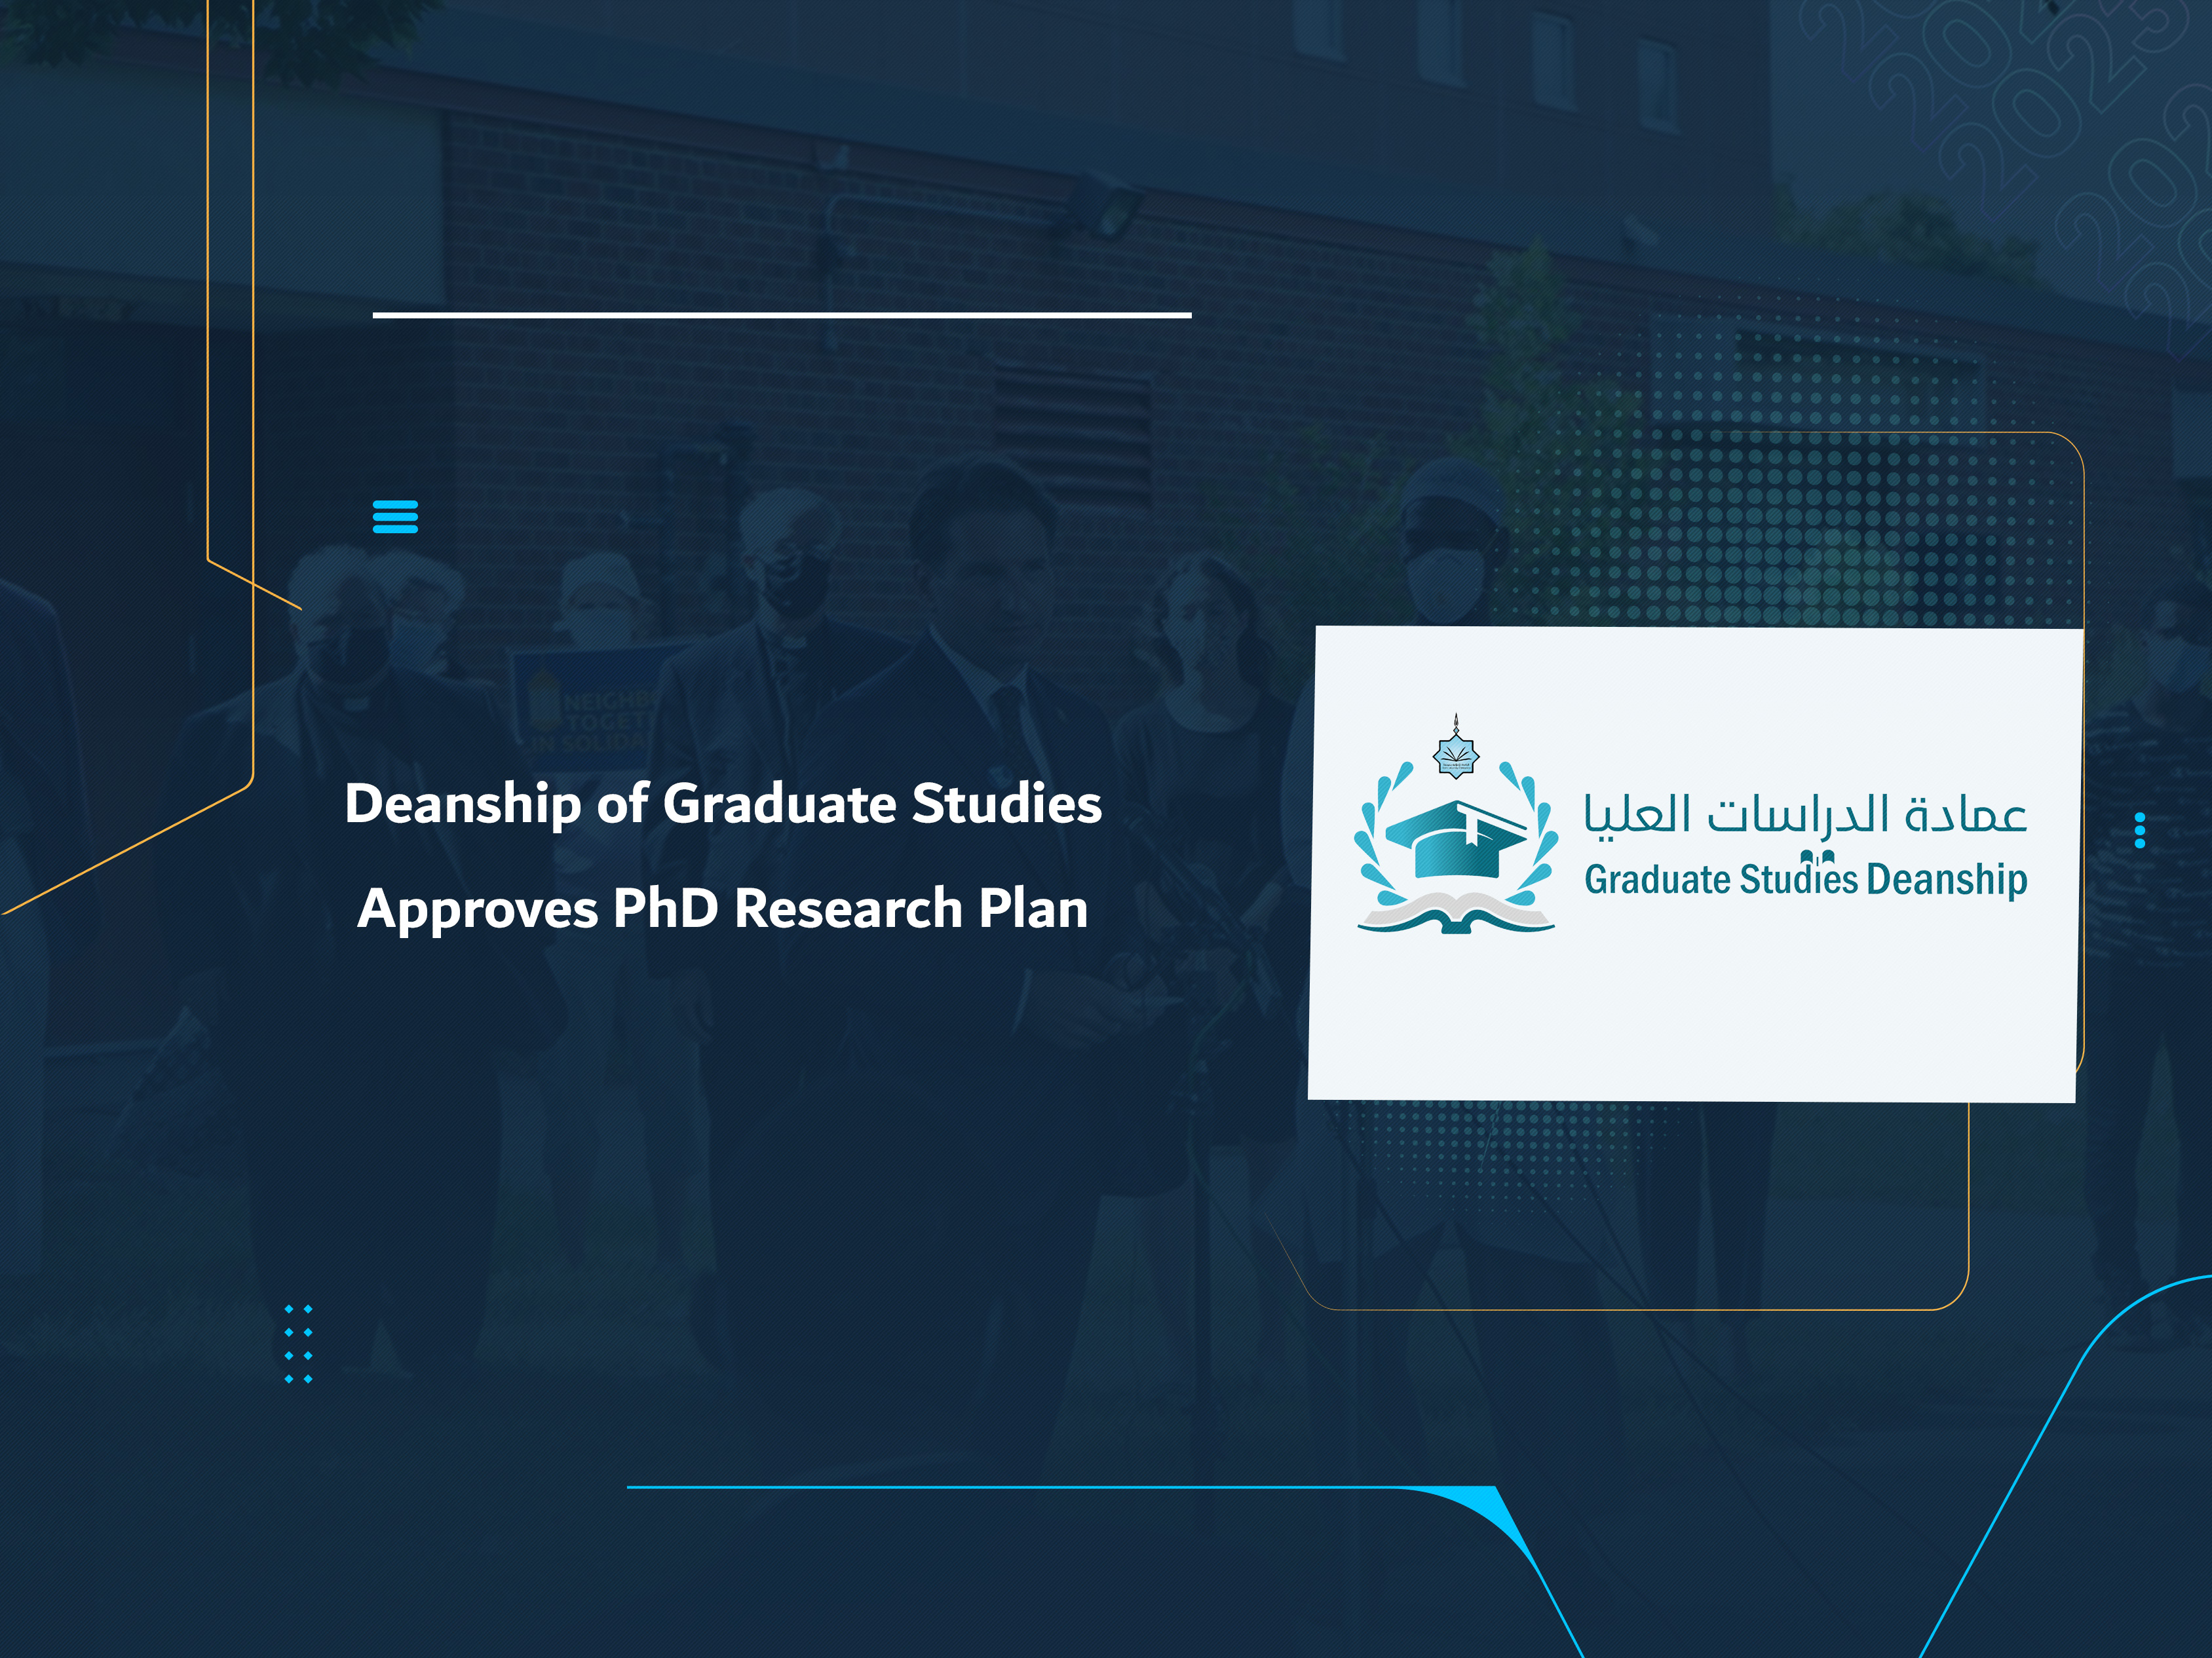 Deanship of Graduate Studies Approves PhD Research Plan